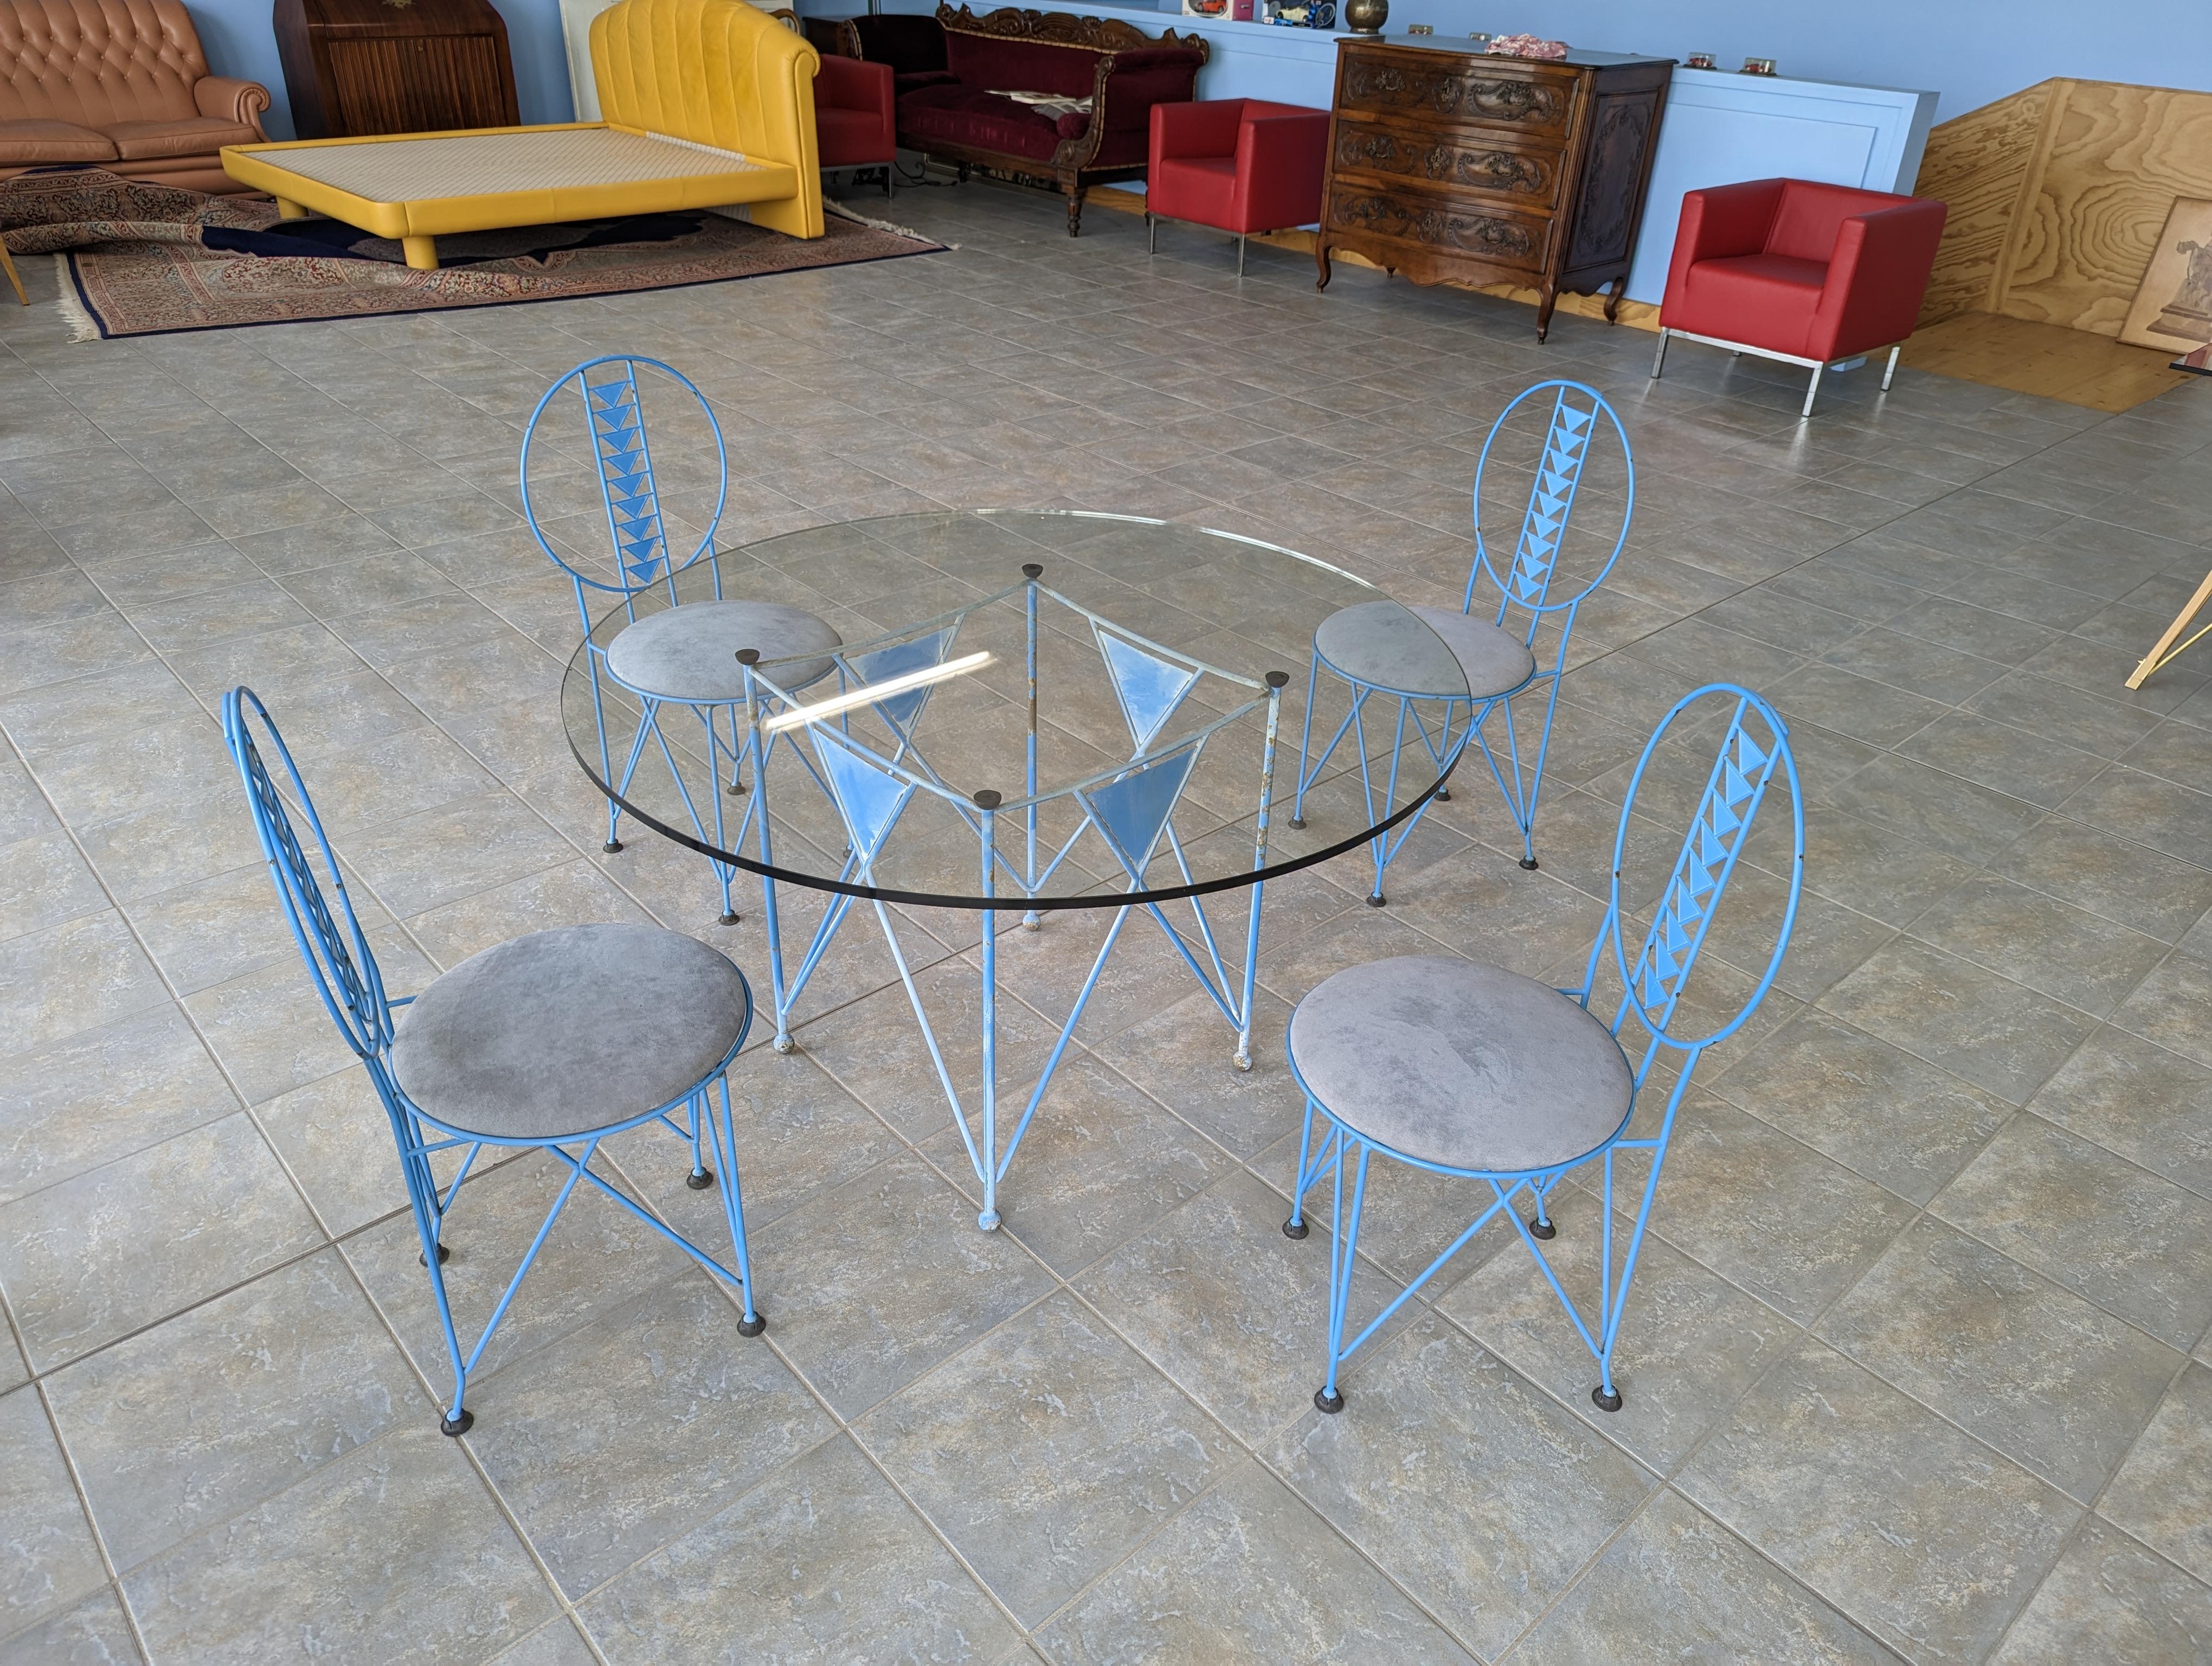 The Frank Lloyd Wright Cassina Midway 2 and 3 enameled steel dining set in Blue color is a remarkable ensemble that combines timeless design with historical significance. This set comprises four Midway 2 Steel Chairs and a Midway 3 Table, featuring